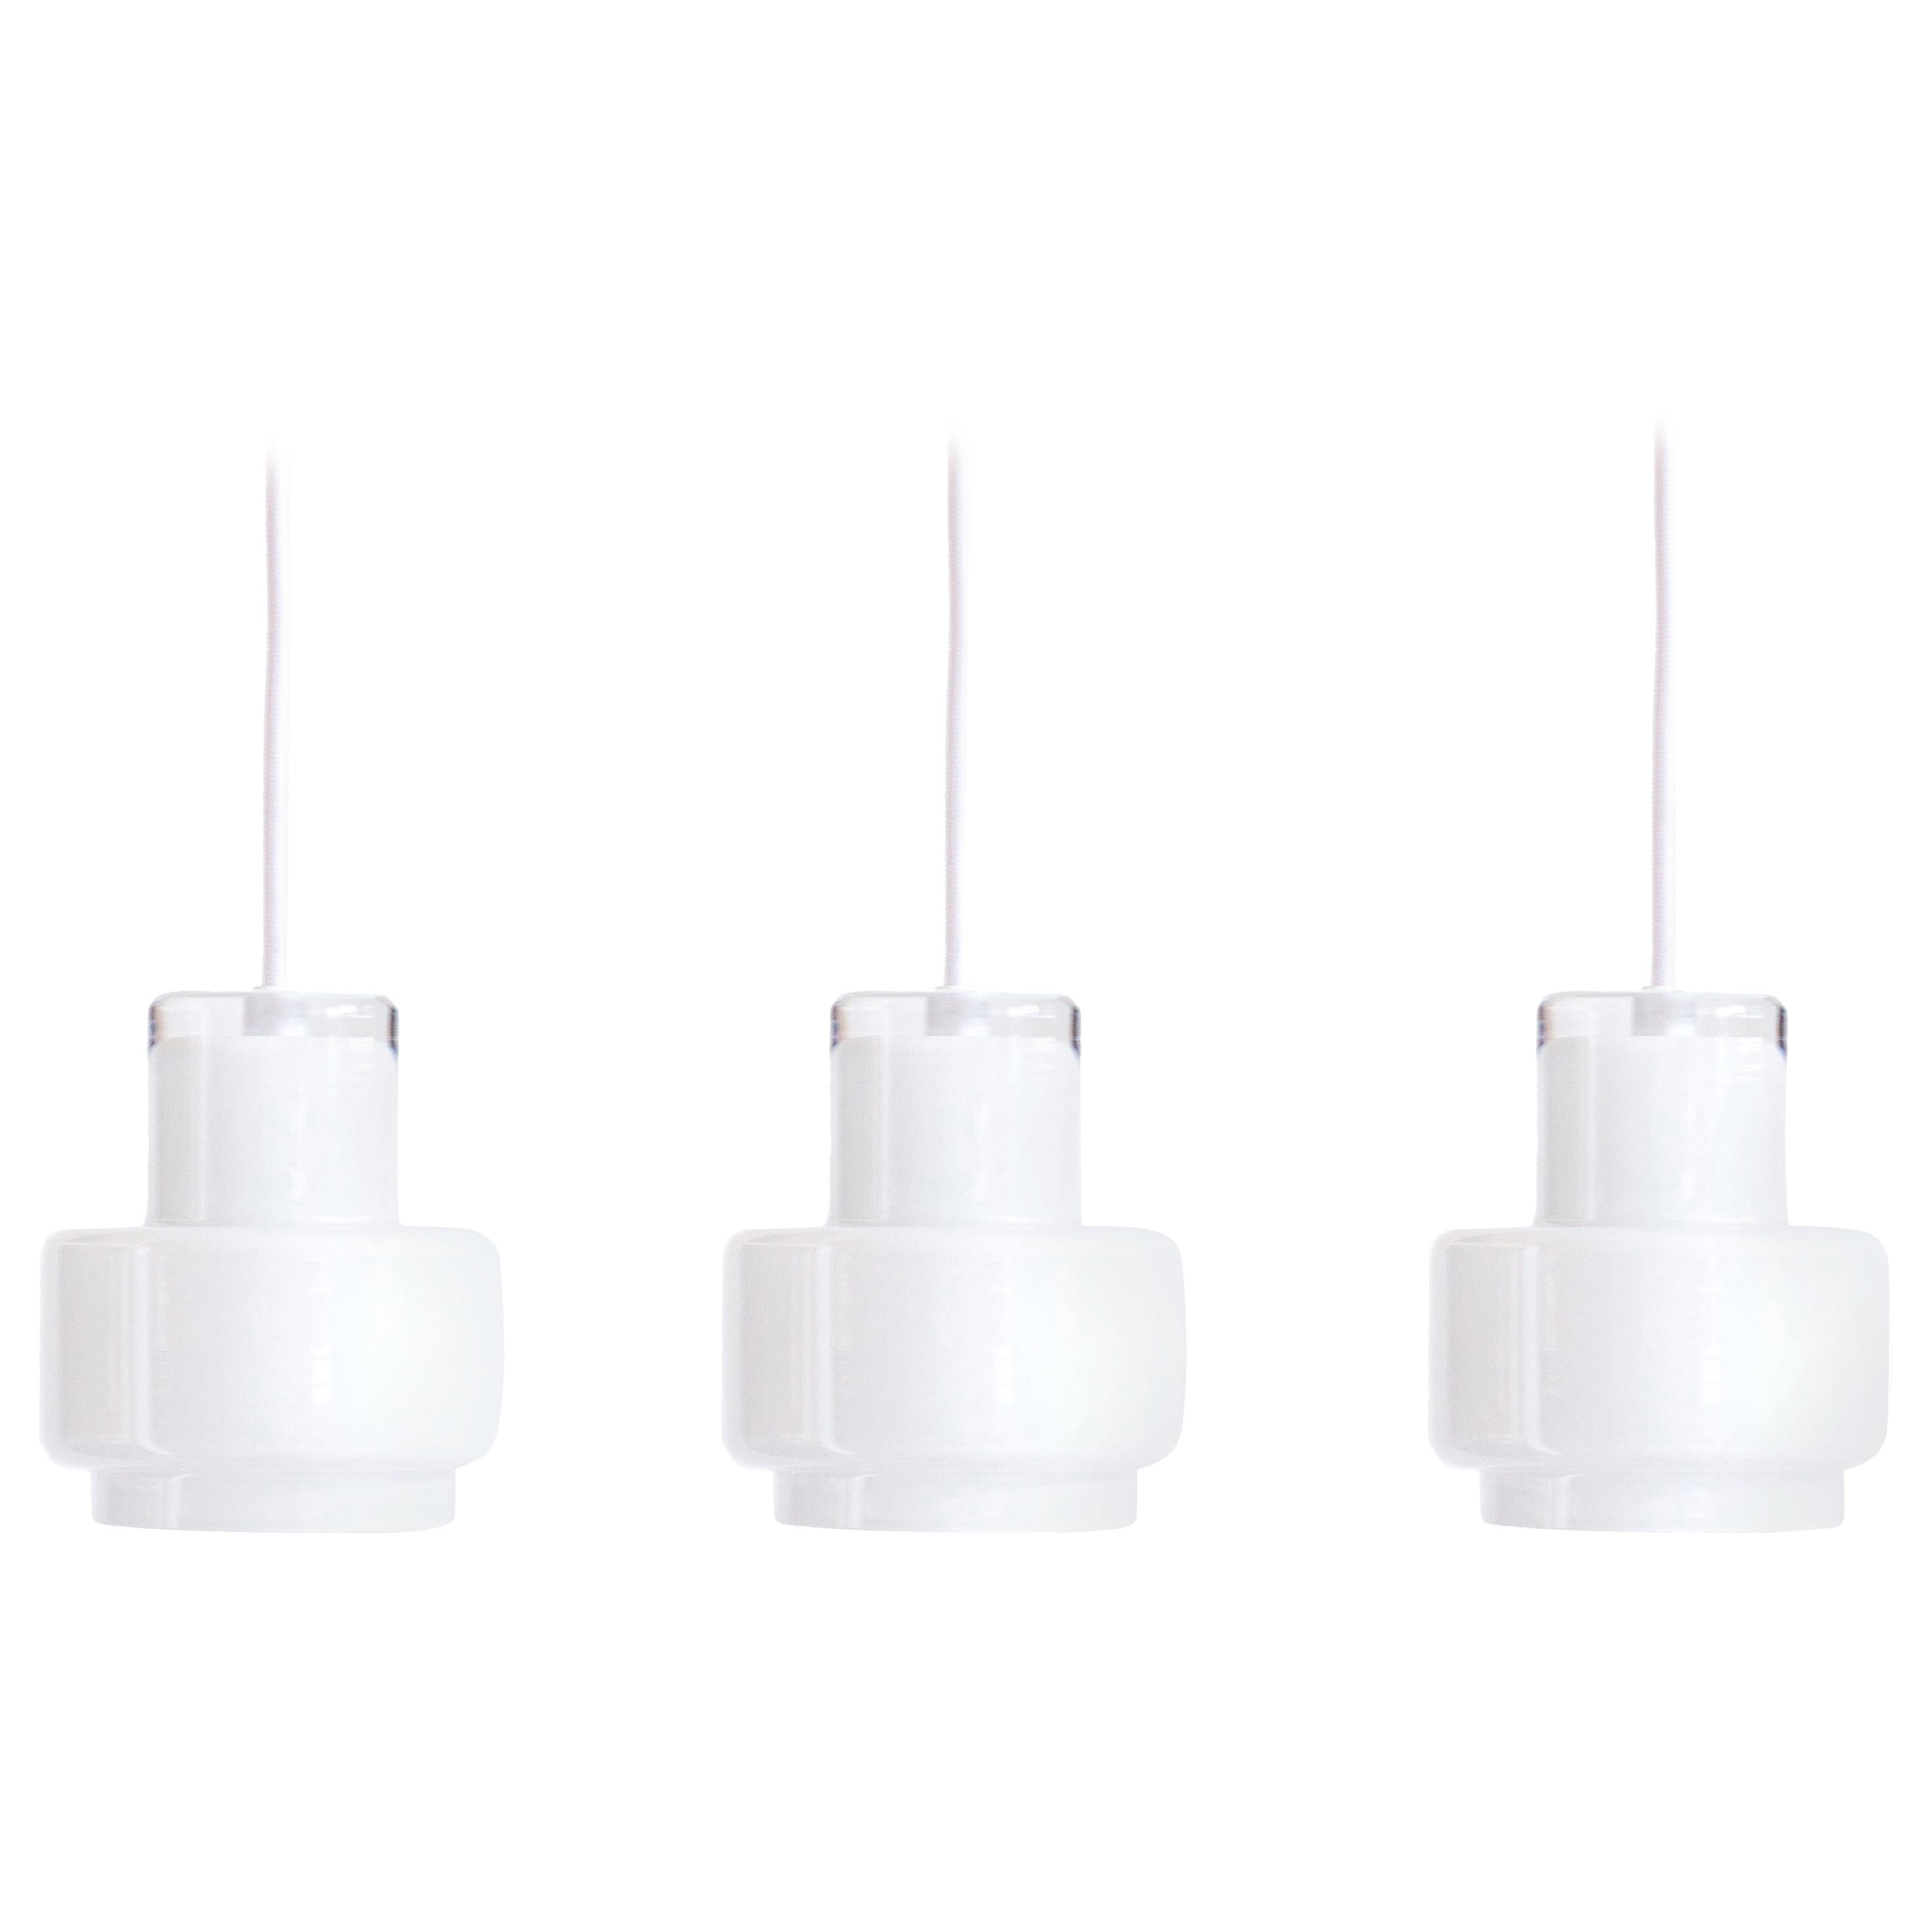 'Multi S' Glass Pendant in White by Jokinen and Konu for Innolux For Sale